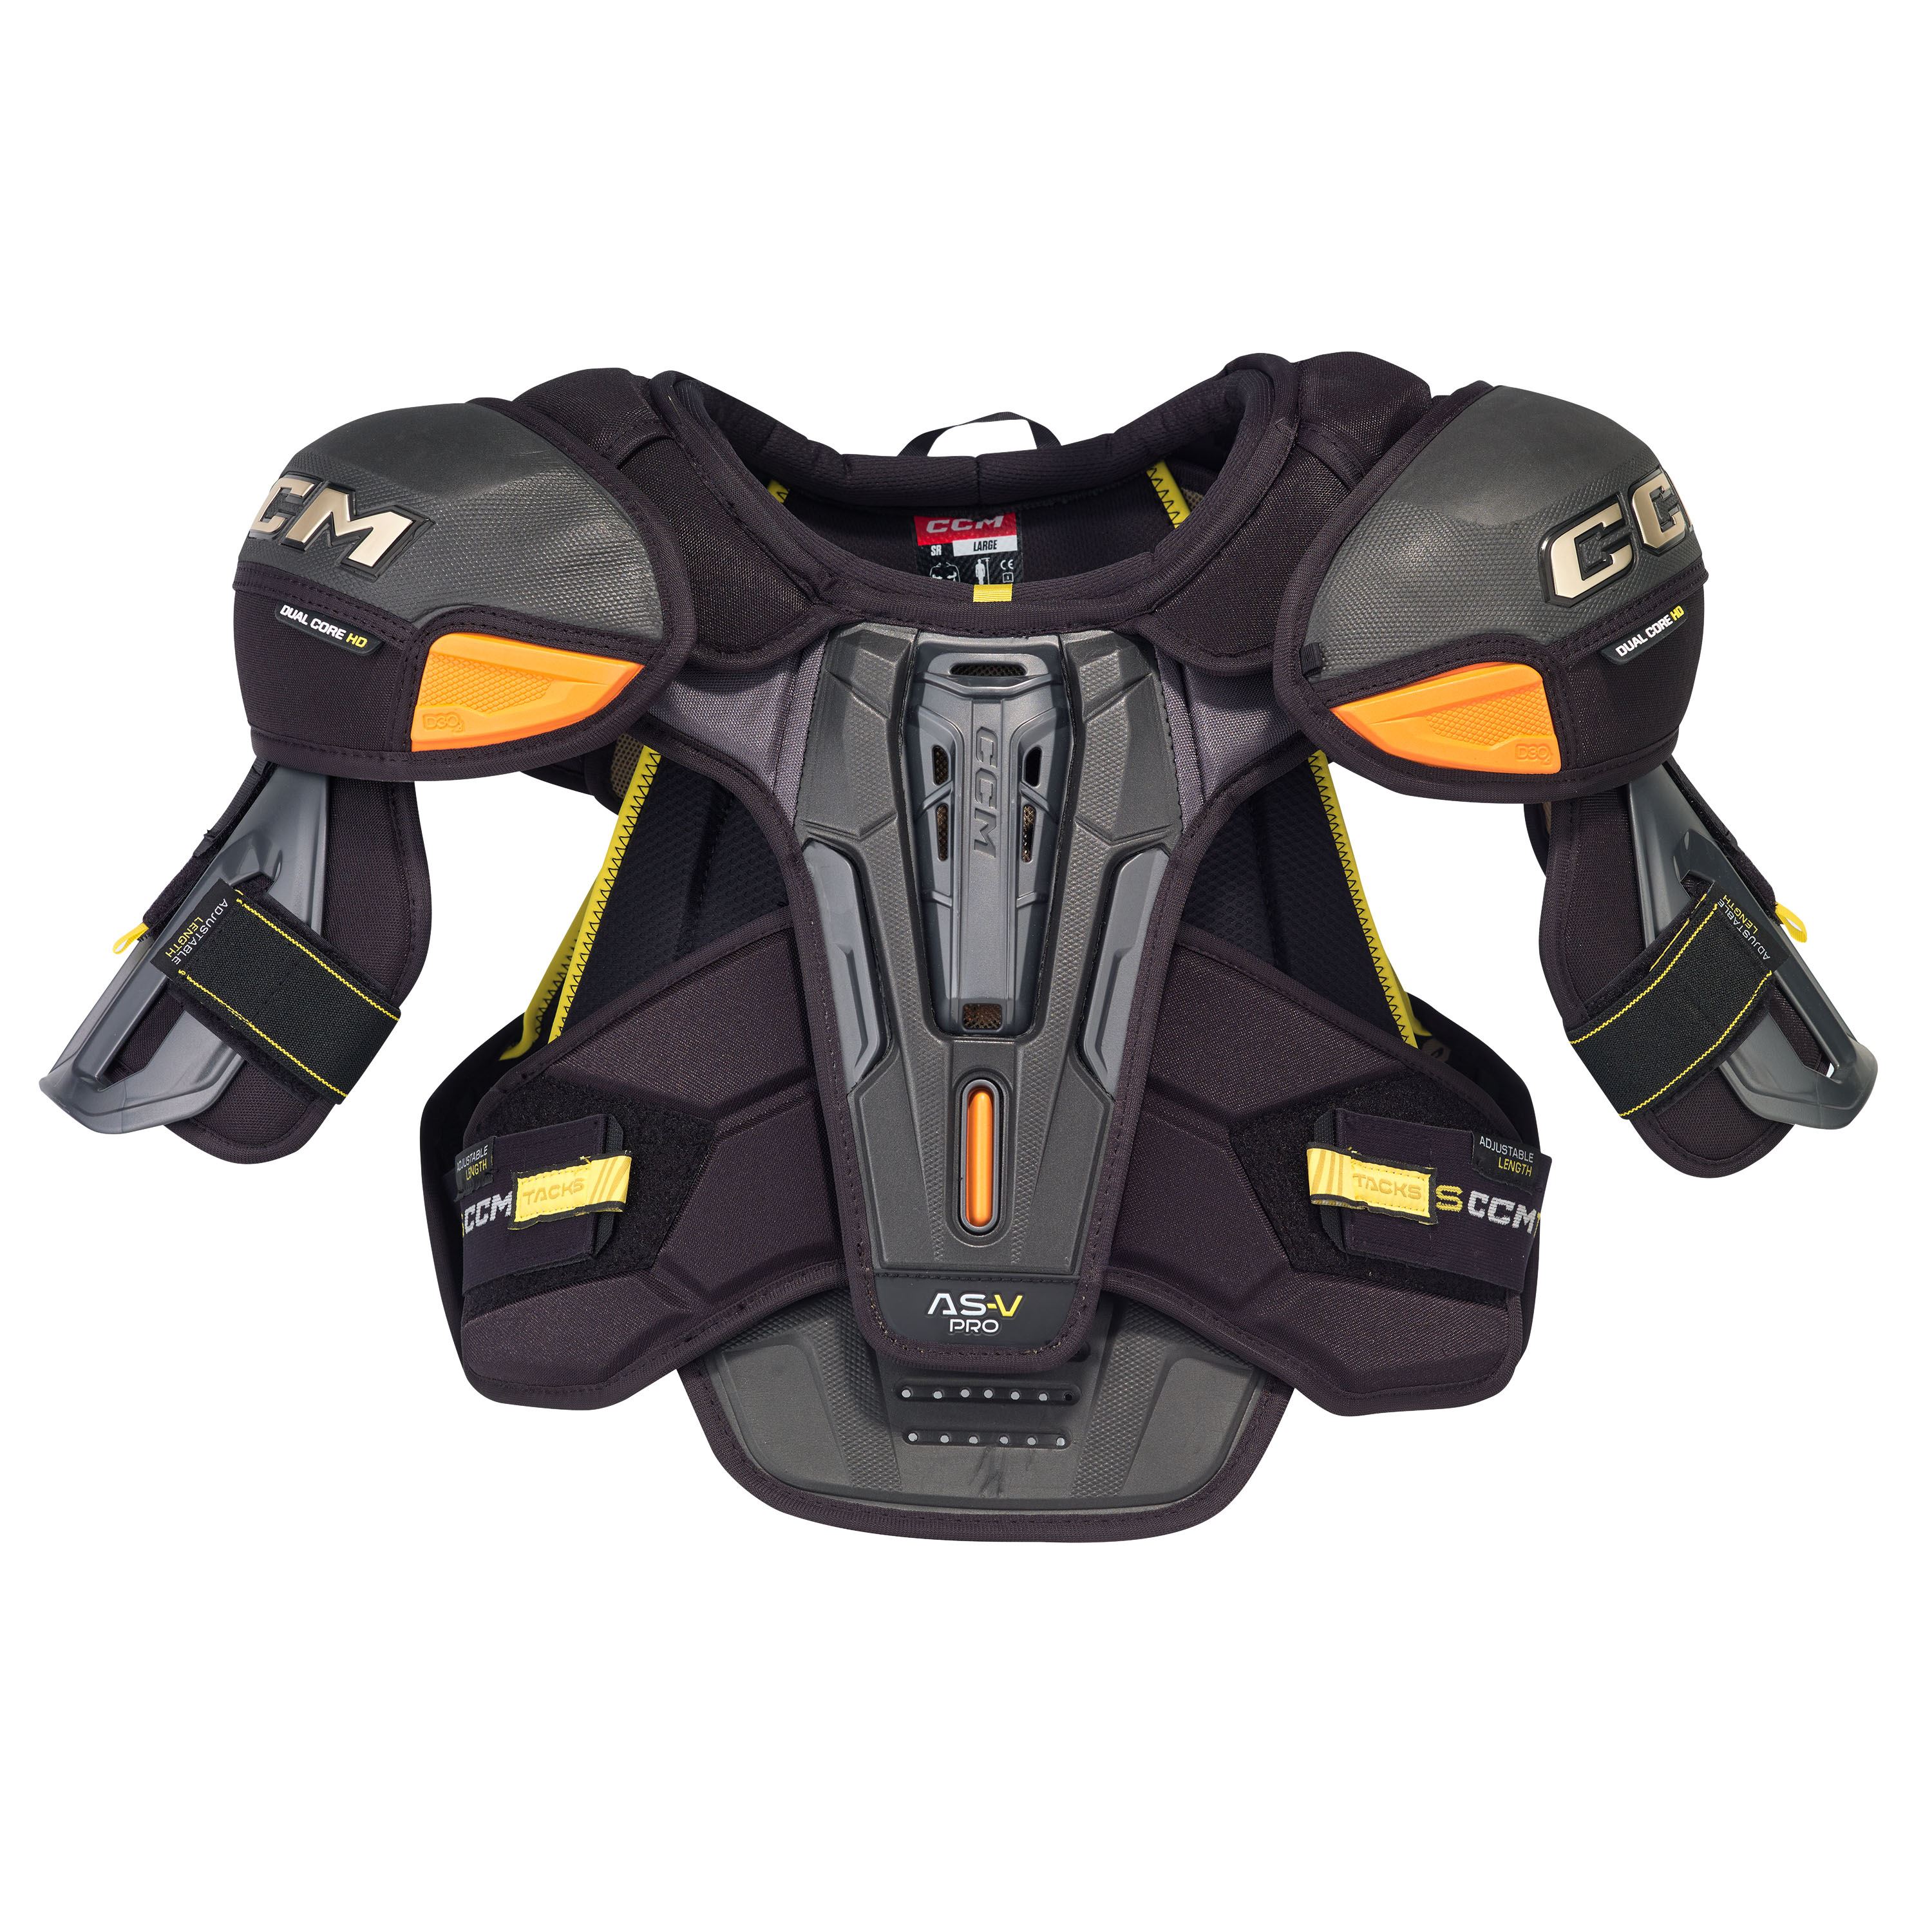 Designed for Women Hockey Protective